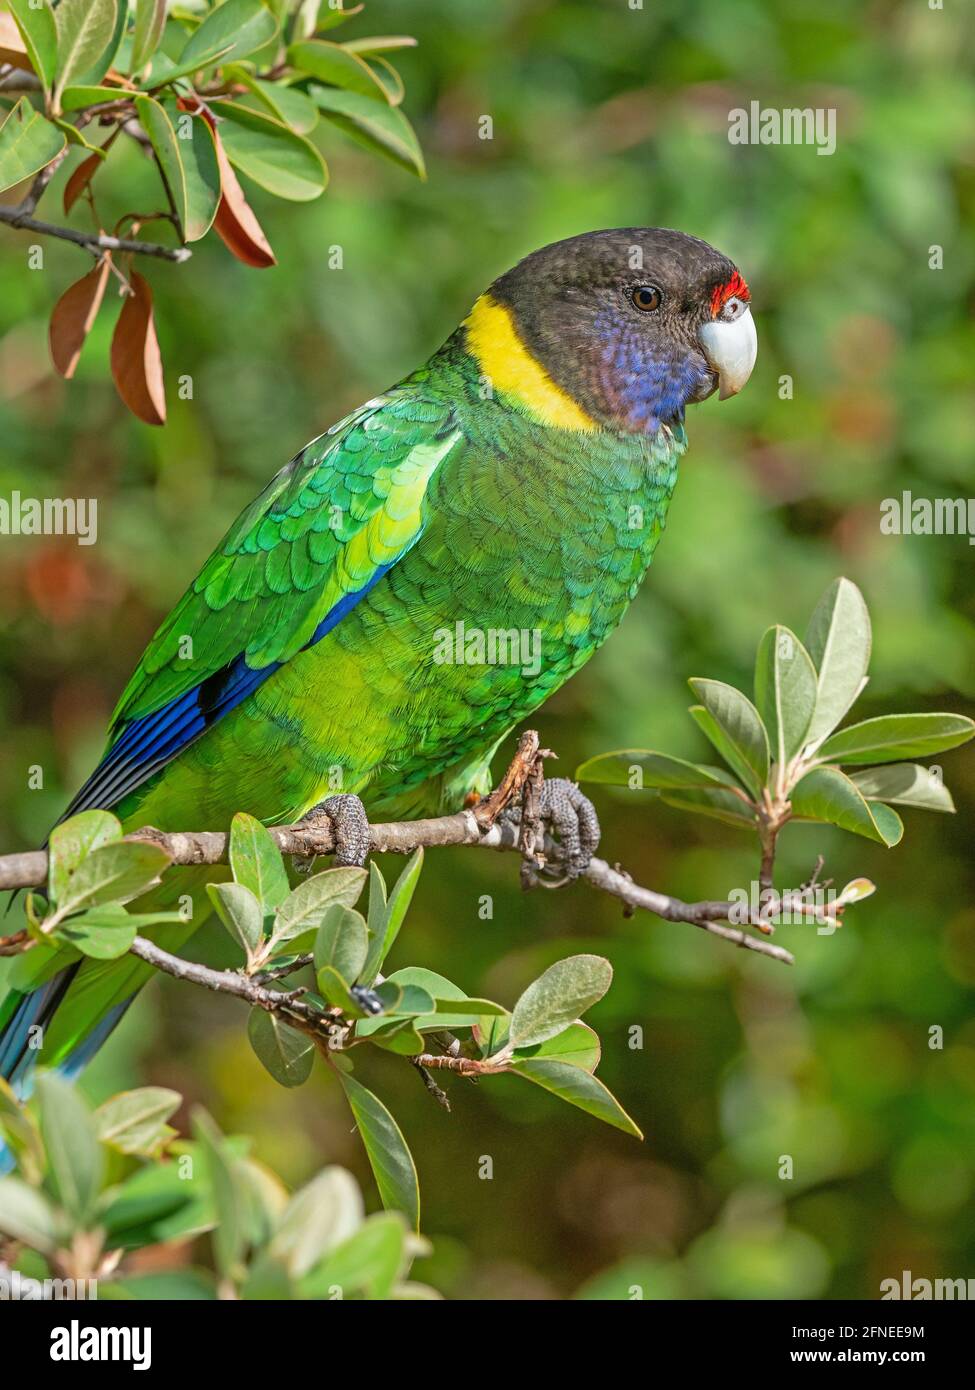 An Australian Ringneck of the western race, known as the Twenty-eight Parrot, photographed in a forest of South-Western Australia. Stock Photo